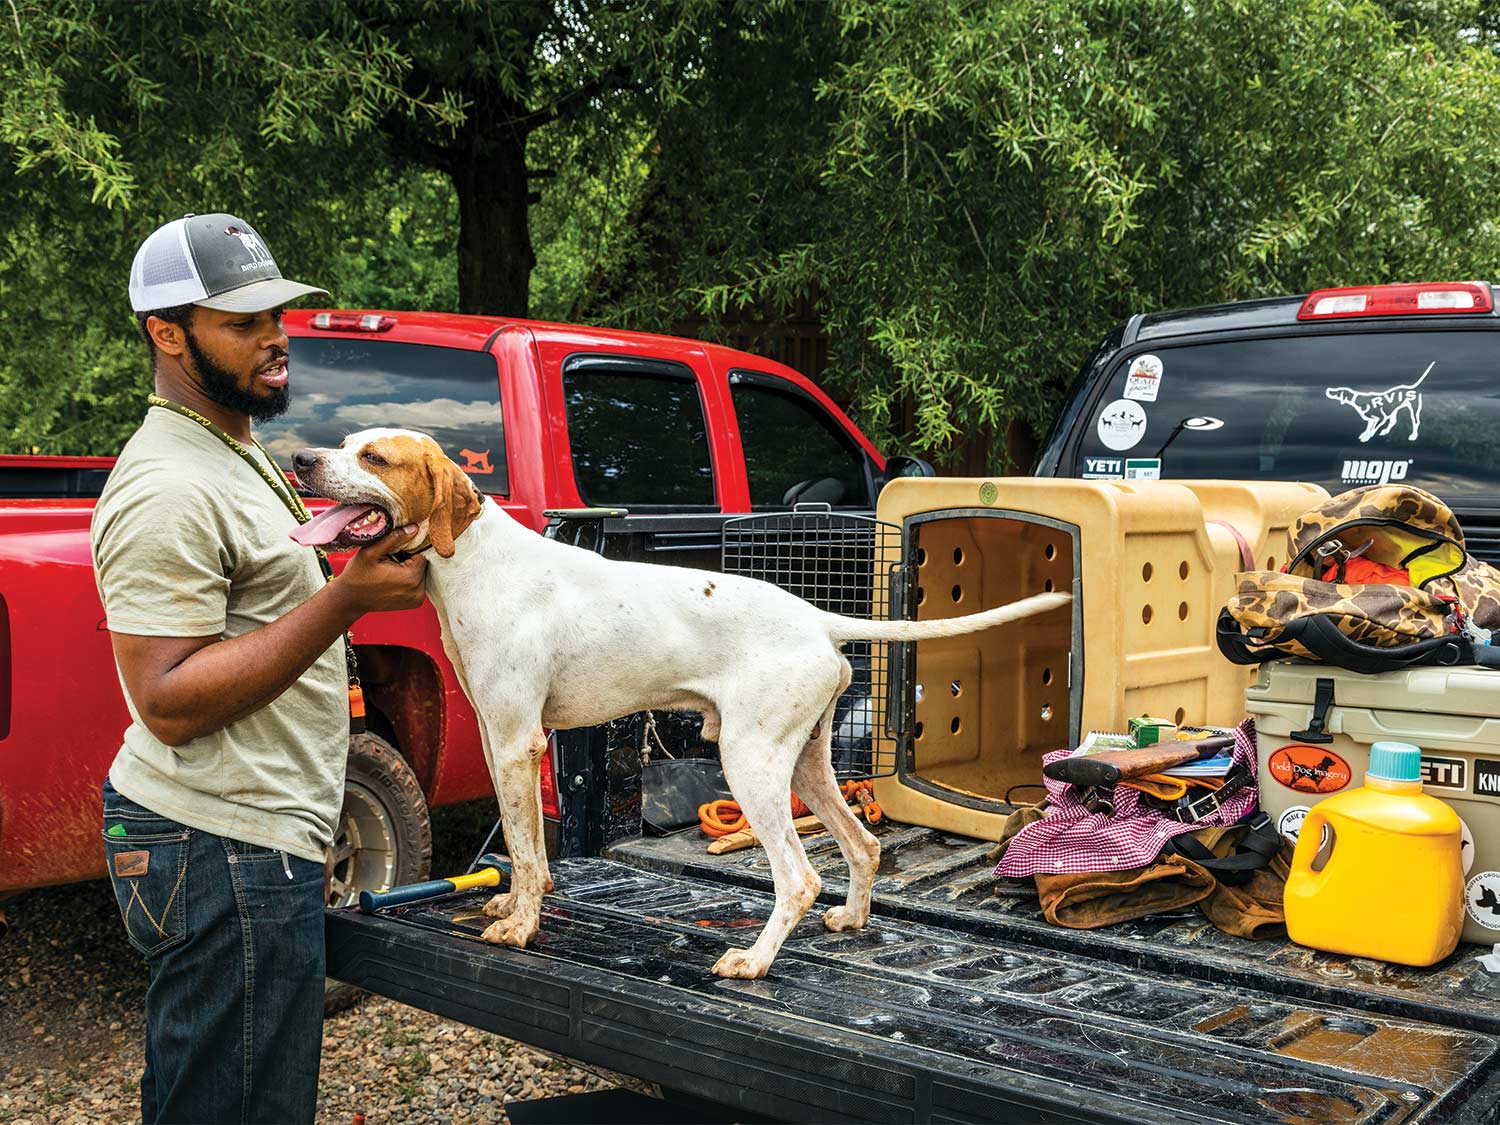 A hunter pets his hunting dog that is standing on the tailgate of his truck.